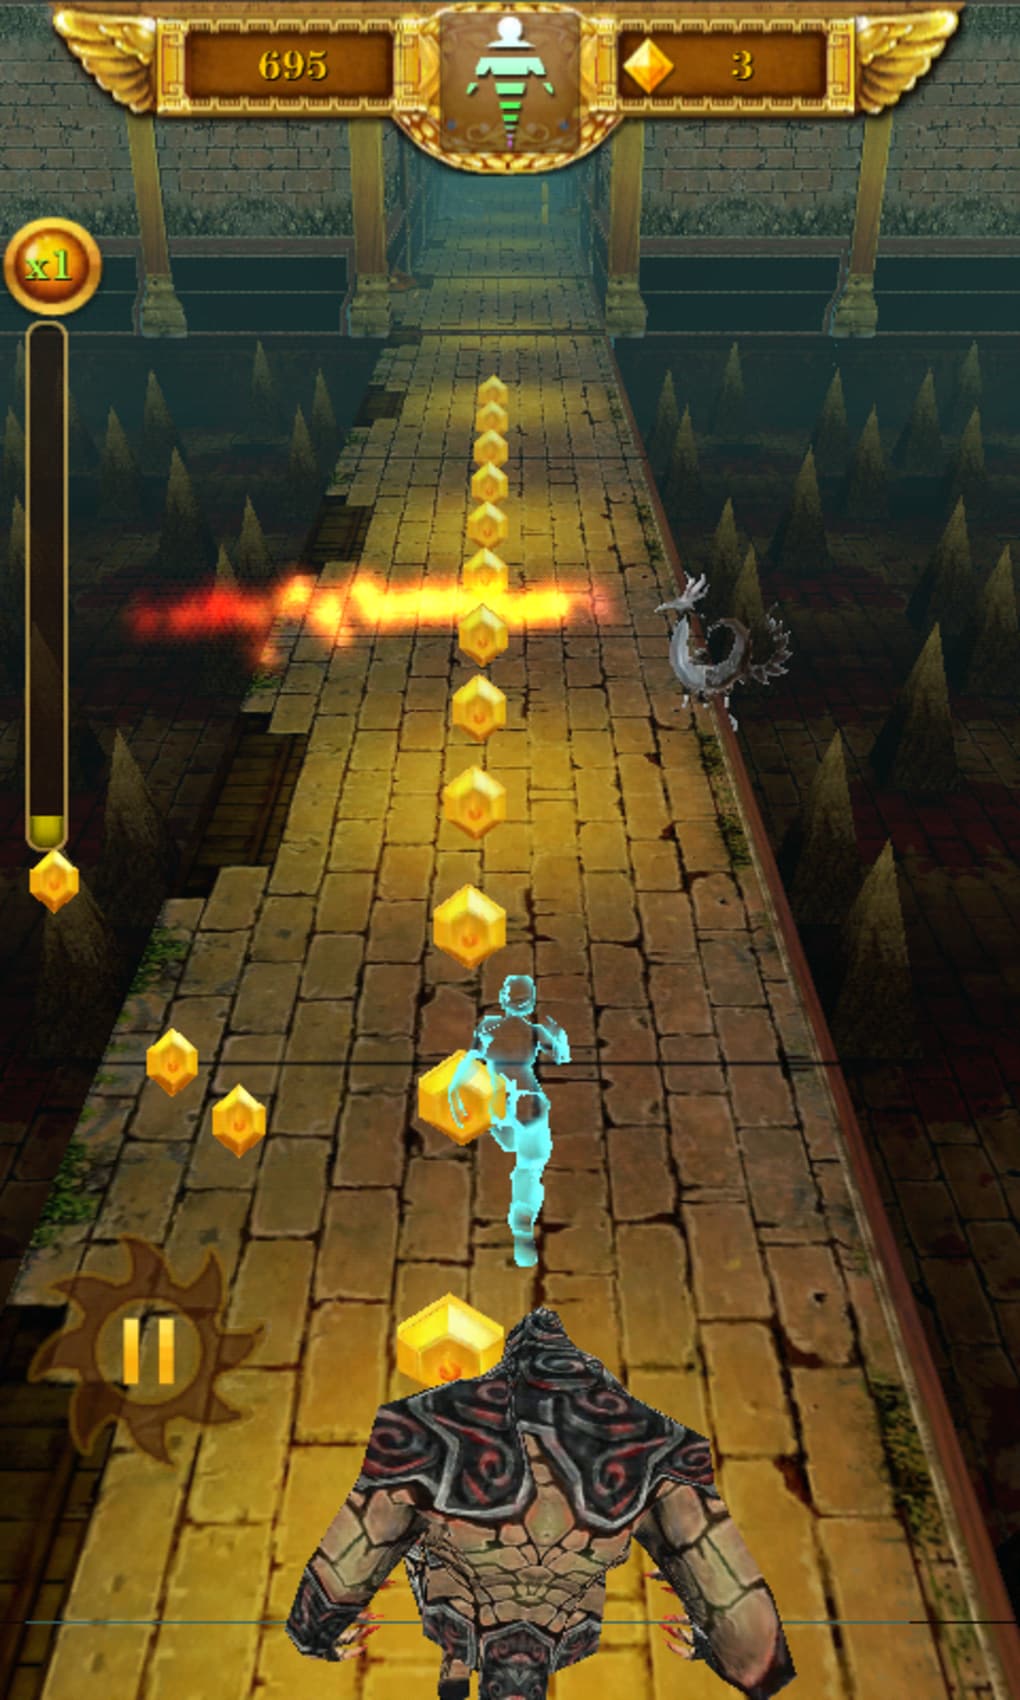 Tomb Runner - Temple Raider: 3 2 1 Run for Life for Android - Download